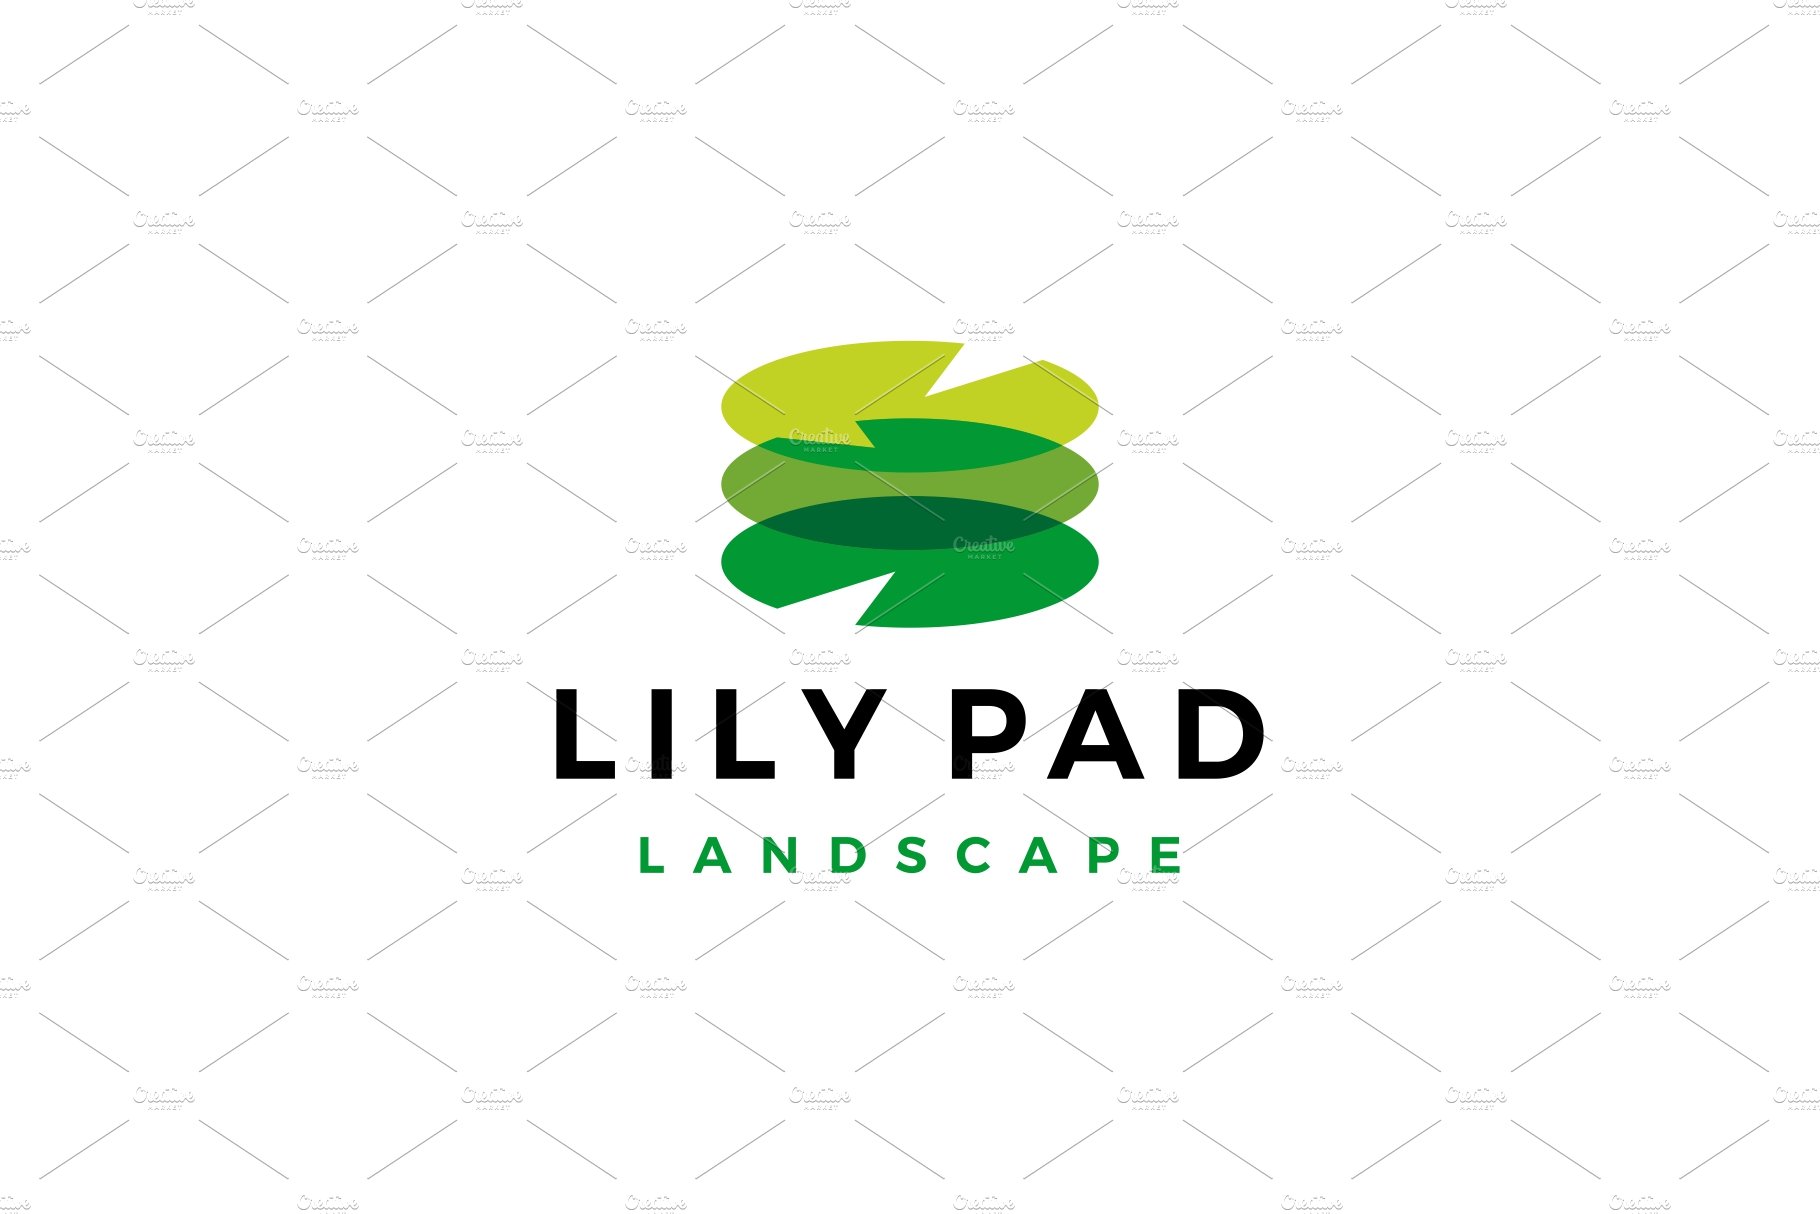 lily pad landscape landscaping logo cover image.